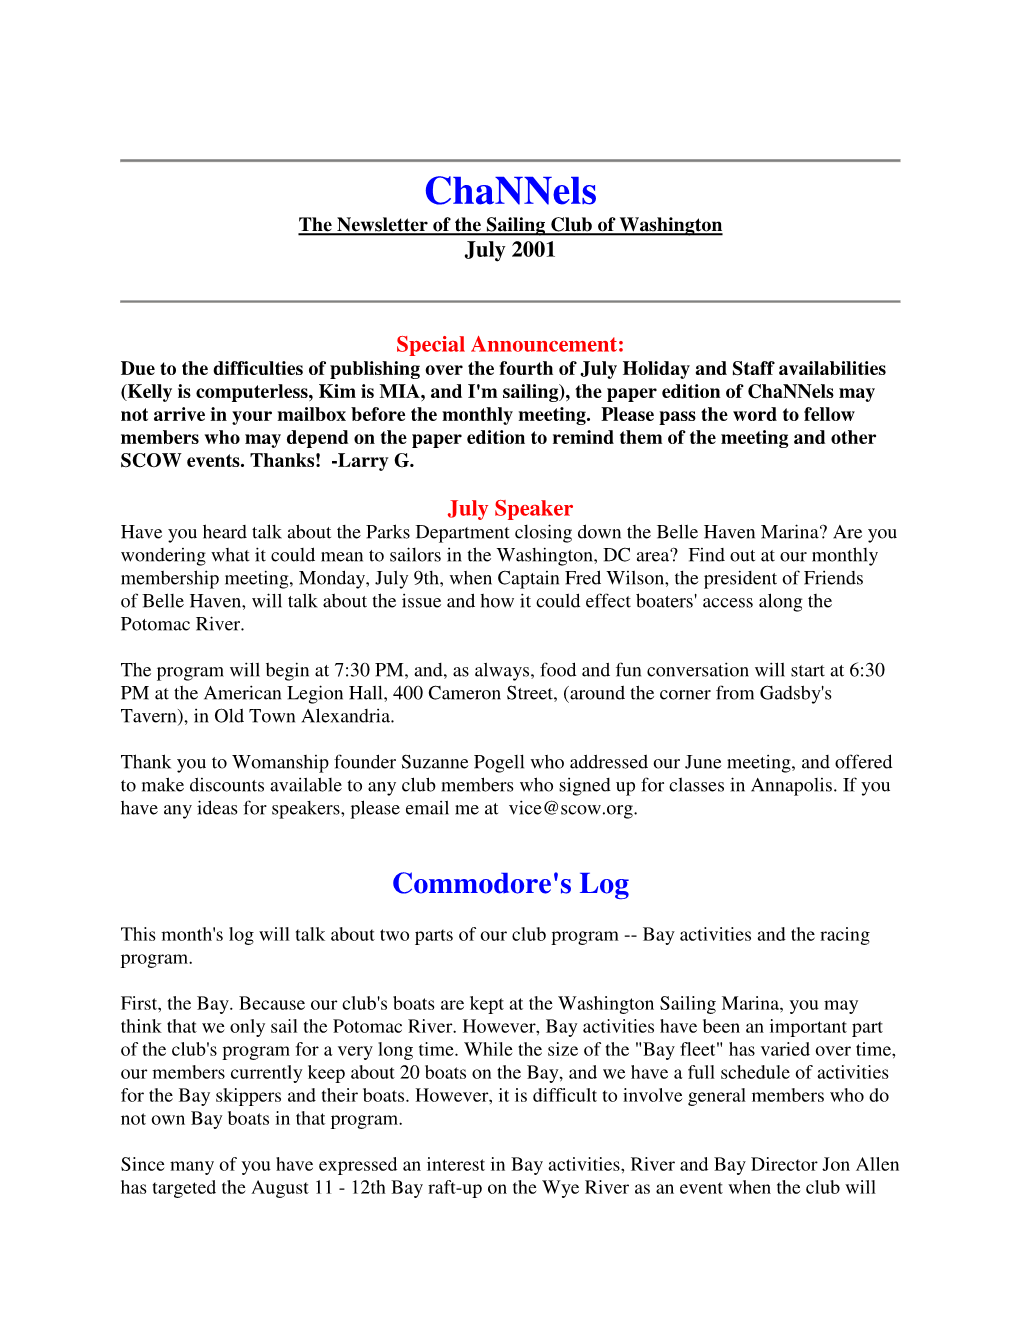 Channels the Newsletter of the Sailing Club of Washington July 2001